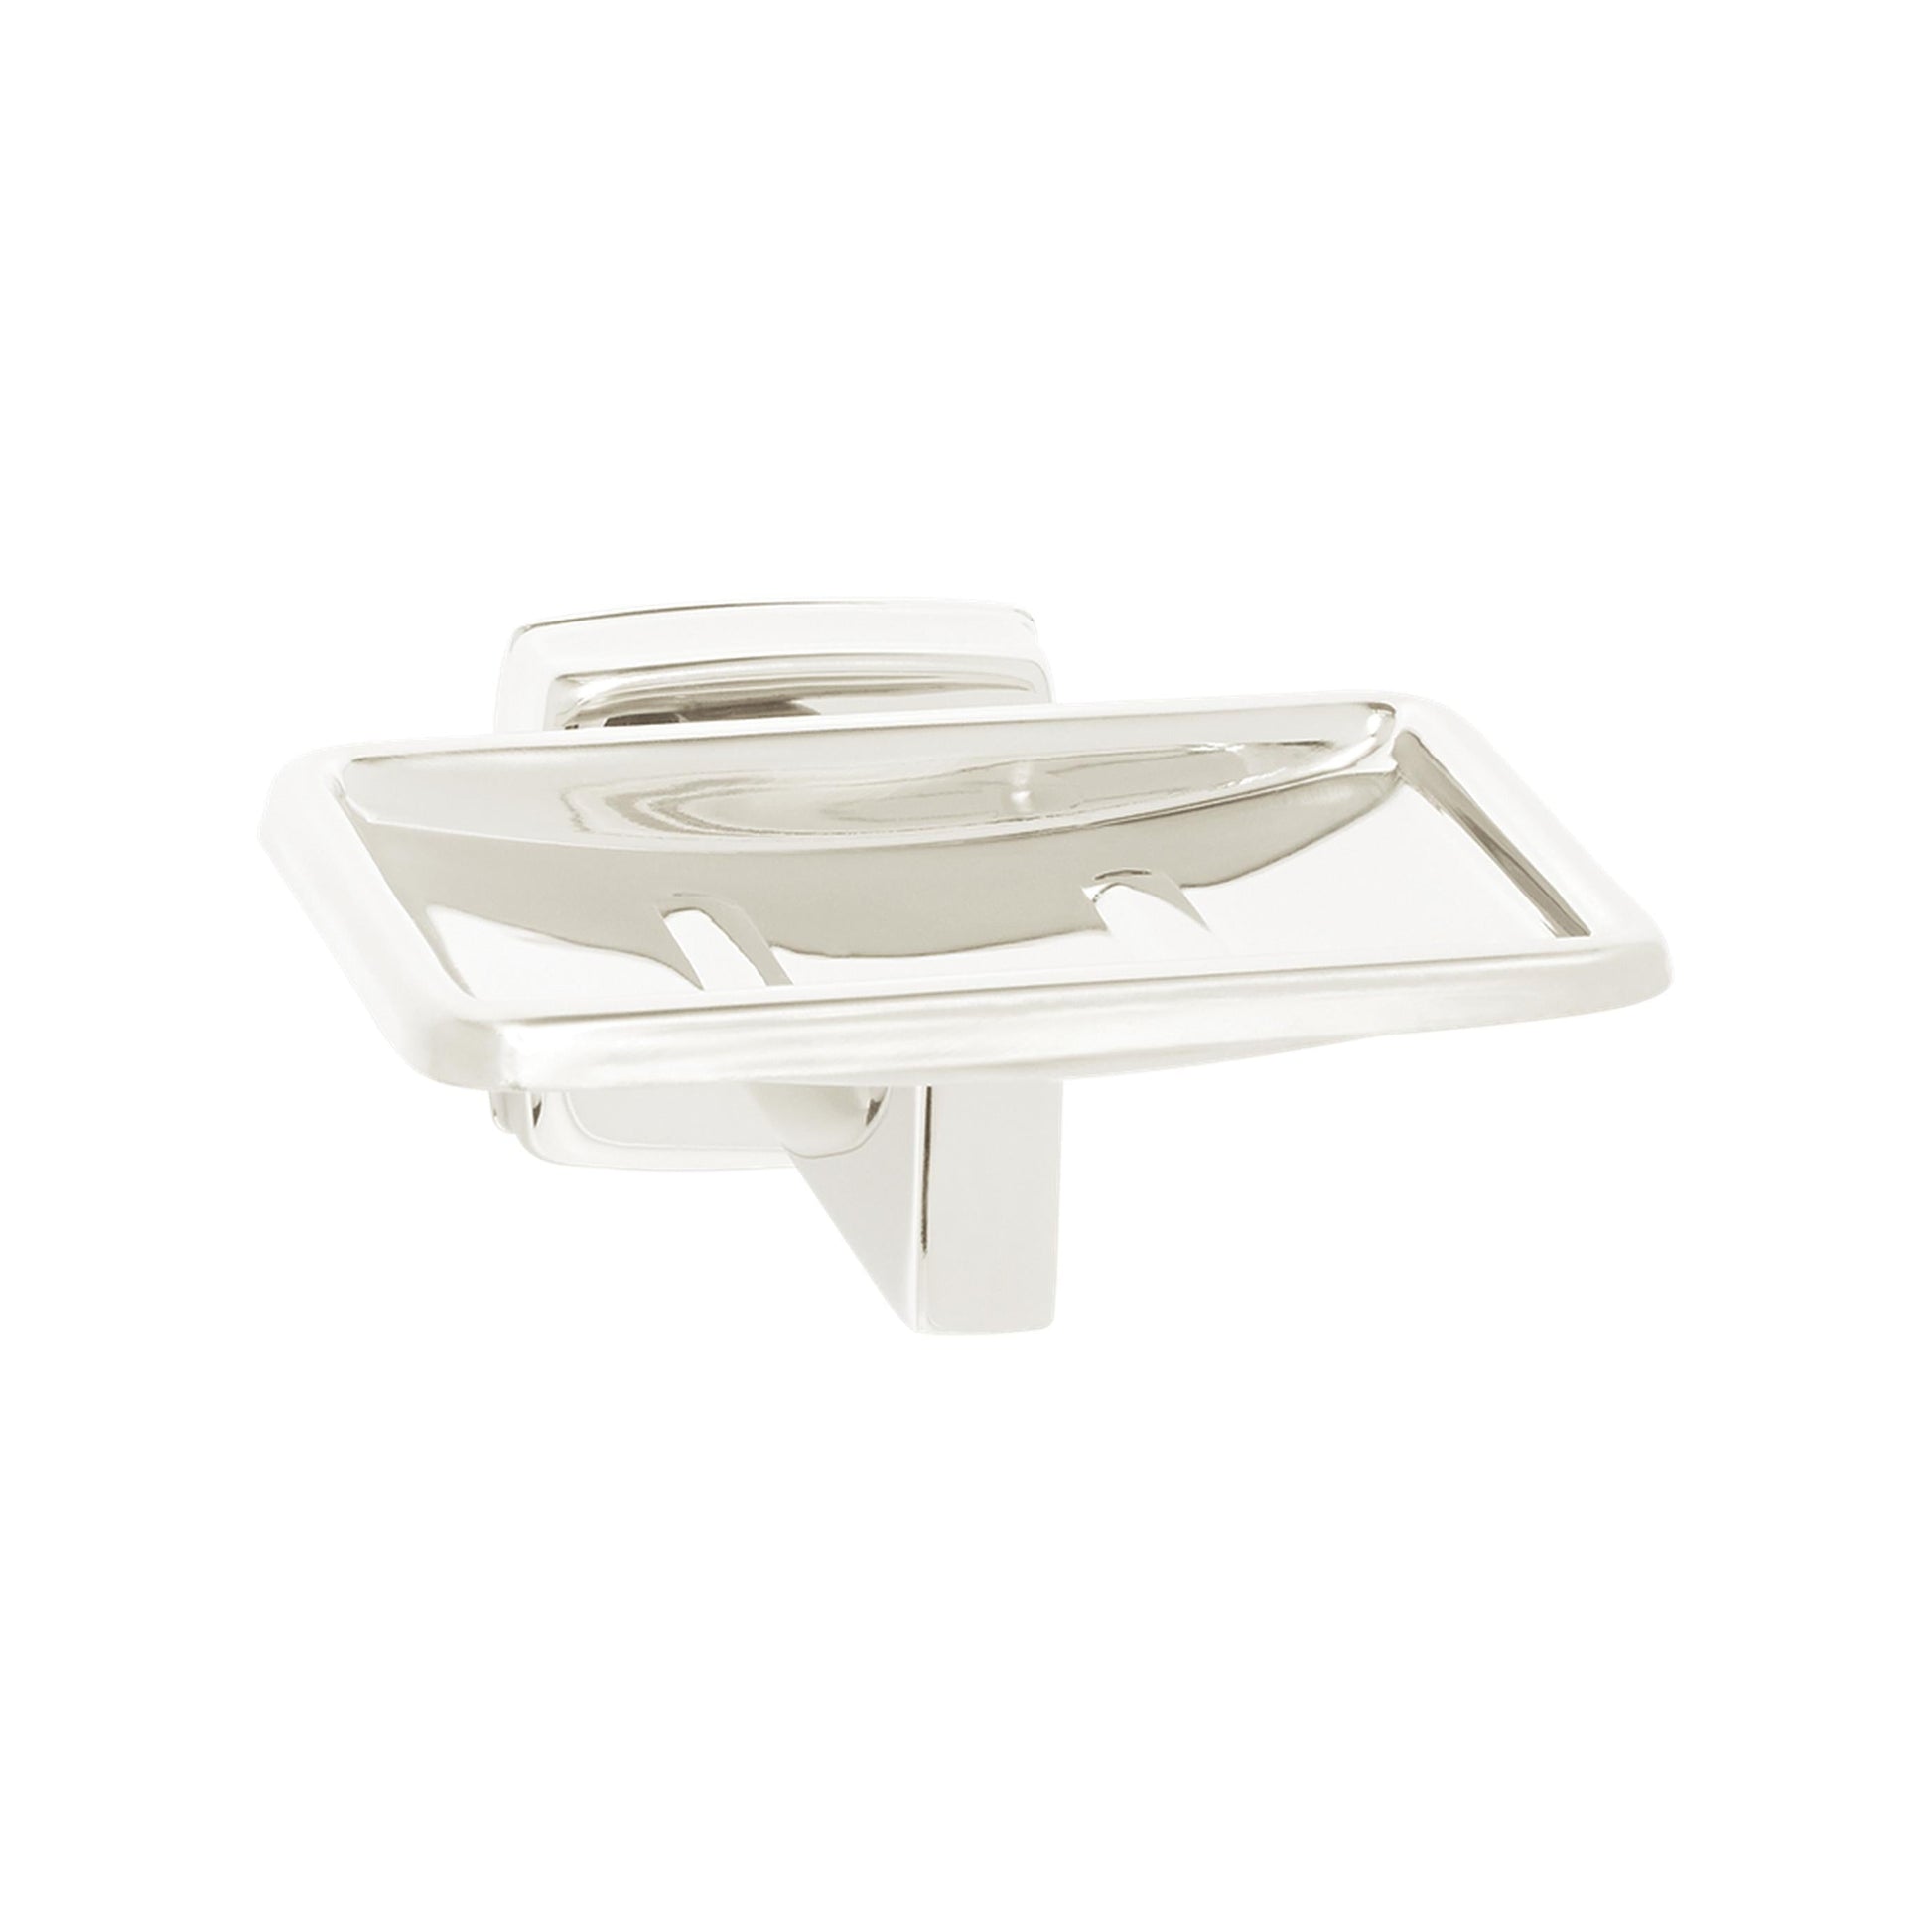 Seachrome 15000 Series 4" x 2" Stainless Steel Soap Holder in Polished Finish